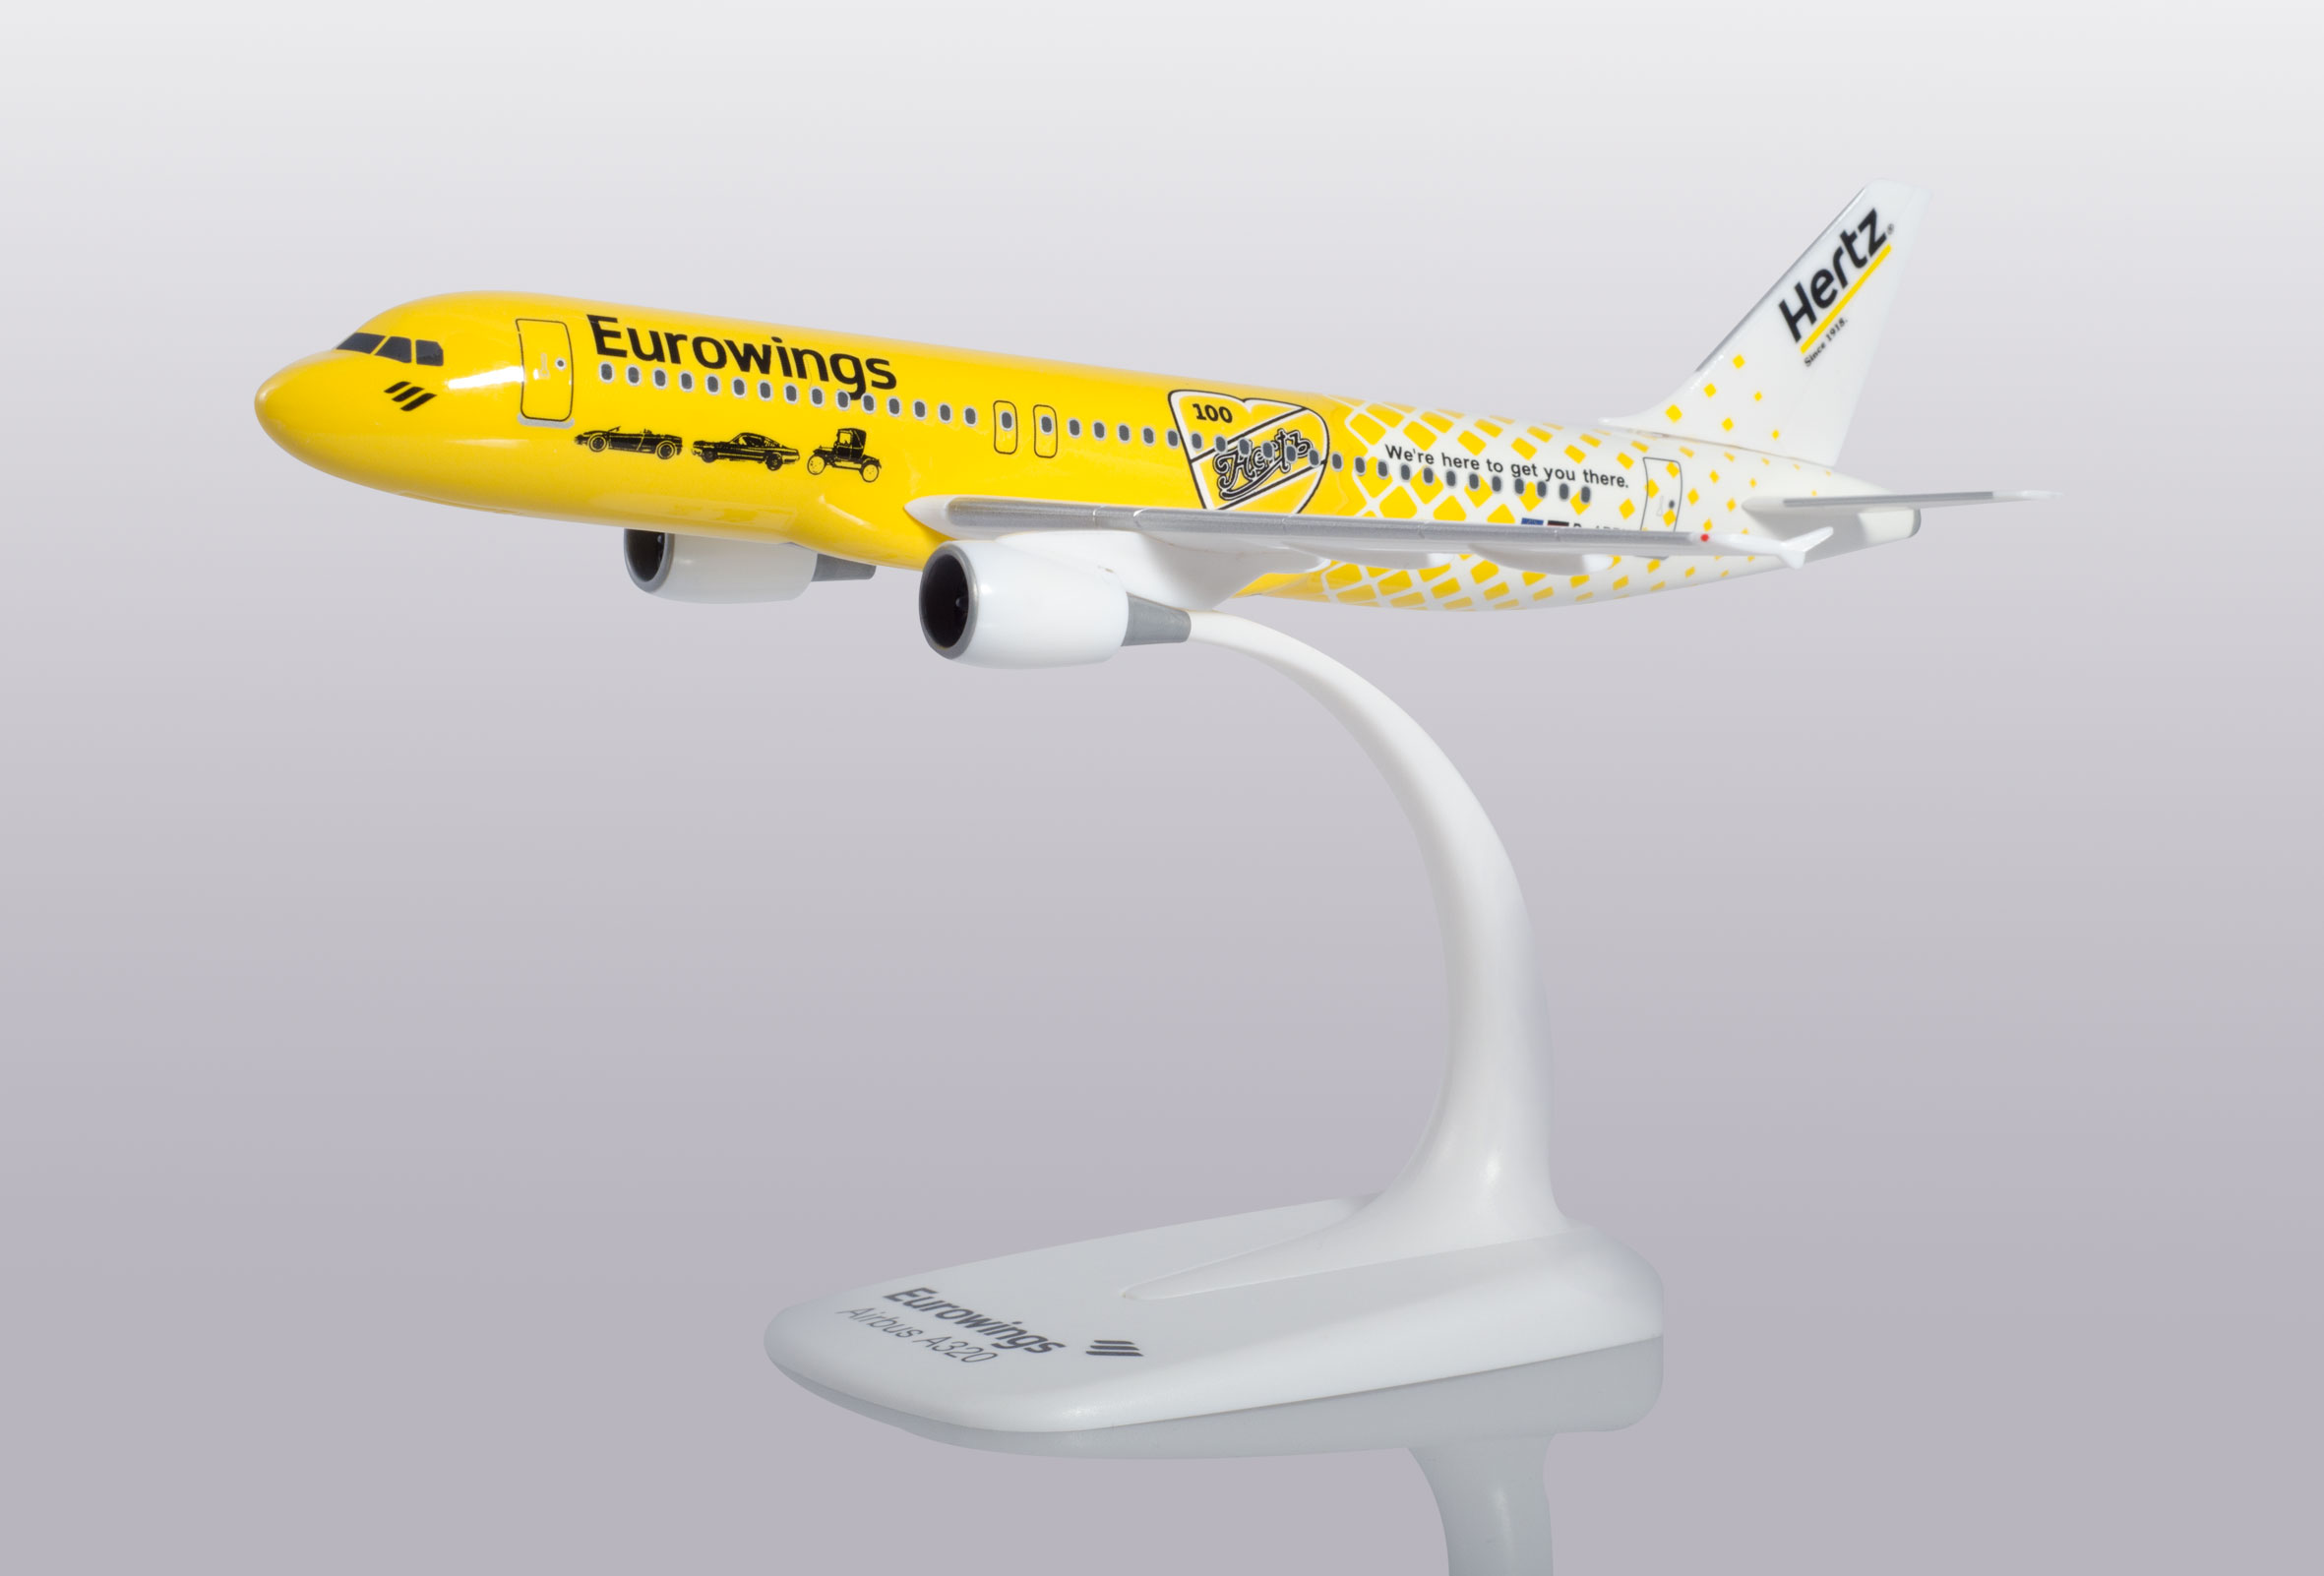 BVB équipe Airbus Eurowings Airbus a320-200 1:200 Herpa Snap-Fit 611312 nouveau 